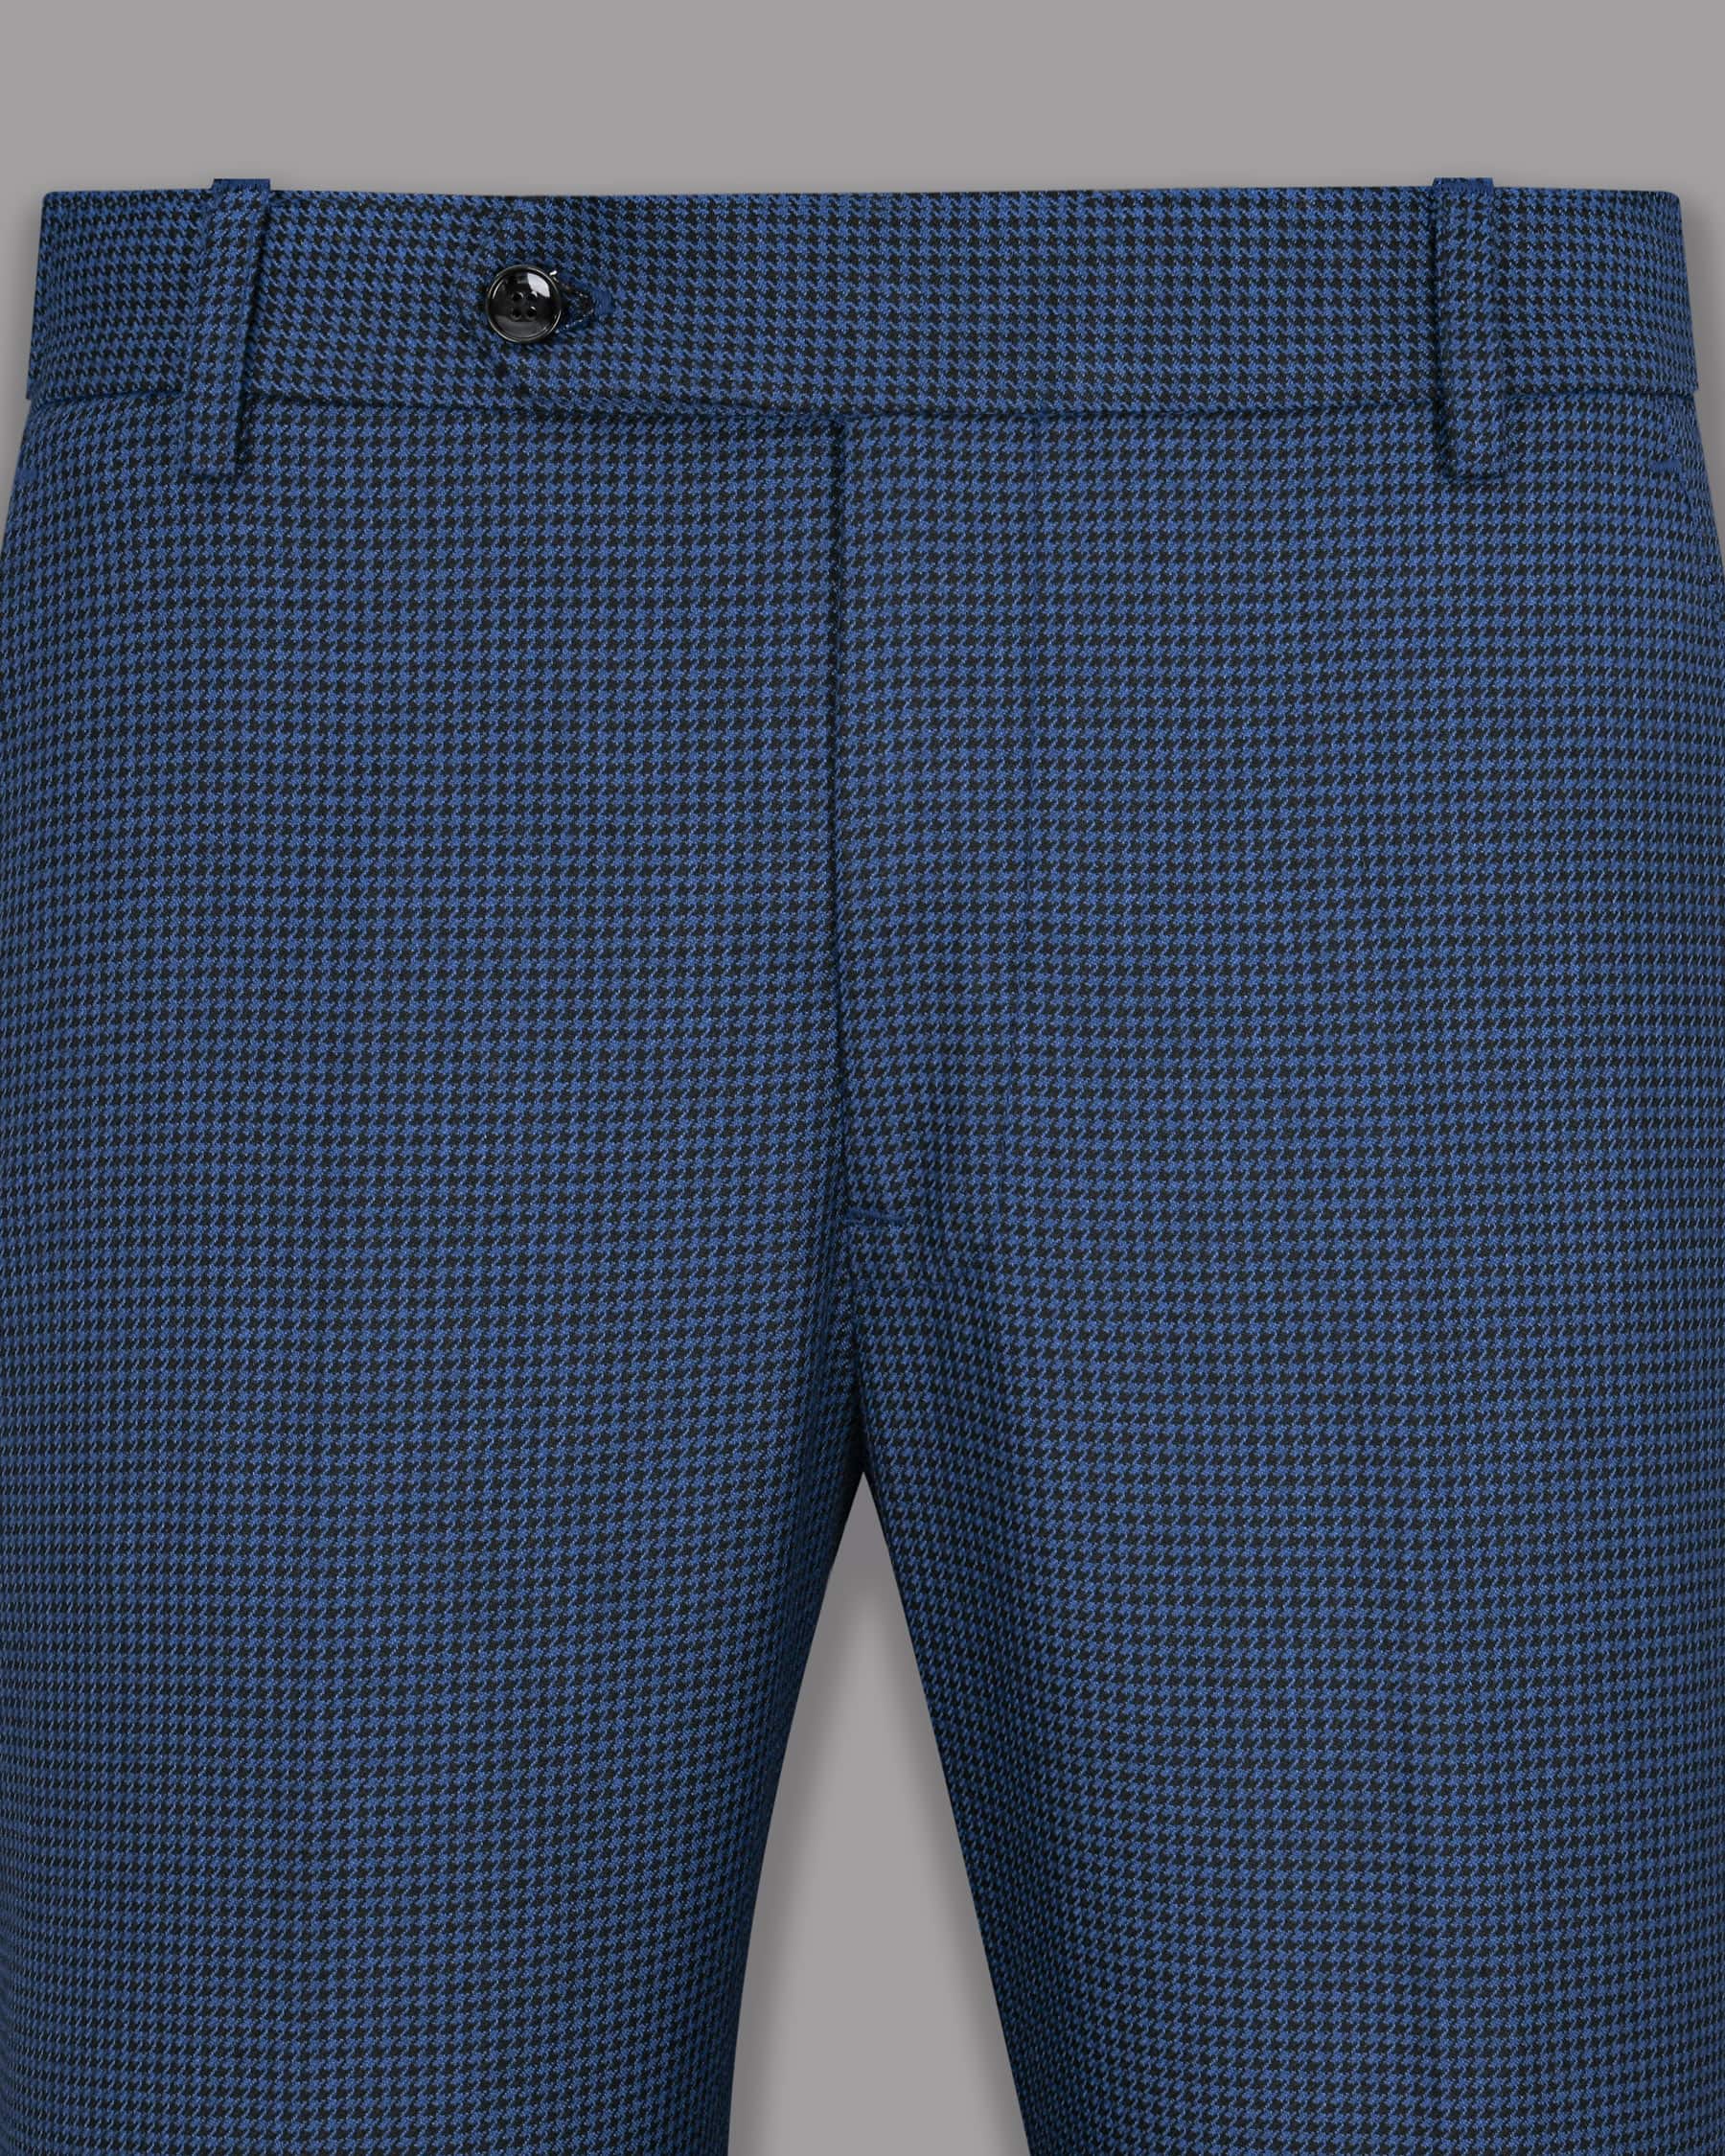 San Juan Blue with Shark Grey Houndstooth Checked Pant T1137-30, T1137-36, T1137-38, T1137-40, T1137-44, T1137-28, T1137-32, T1137-42, T1137-34